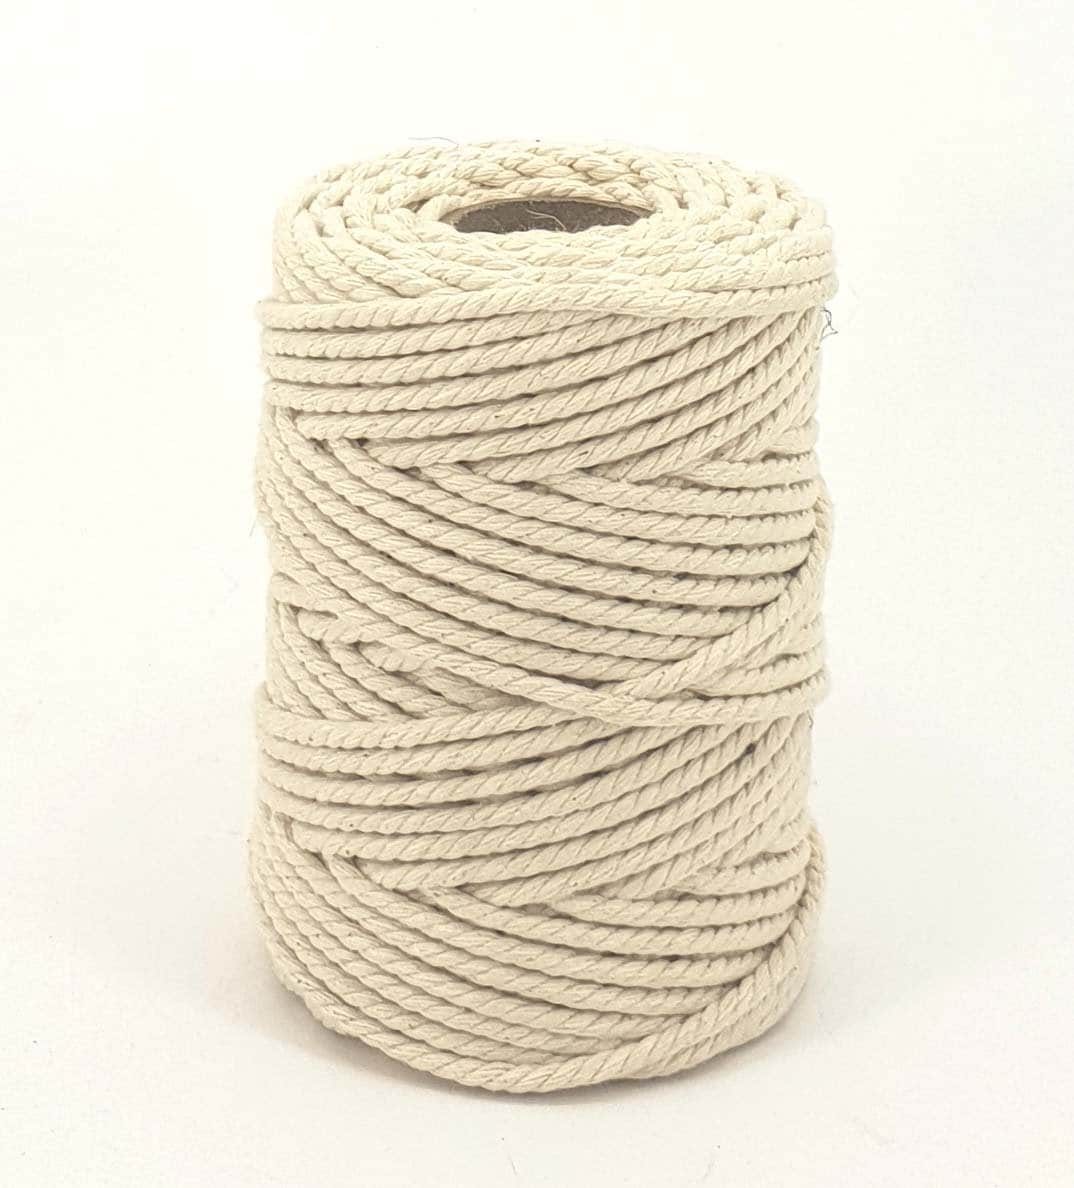 Jute Rope 8 Mm Twisted Natural Jute Rope for Crafts 